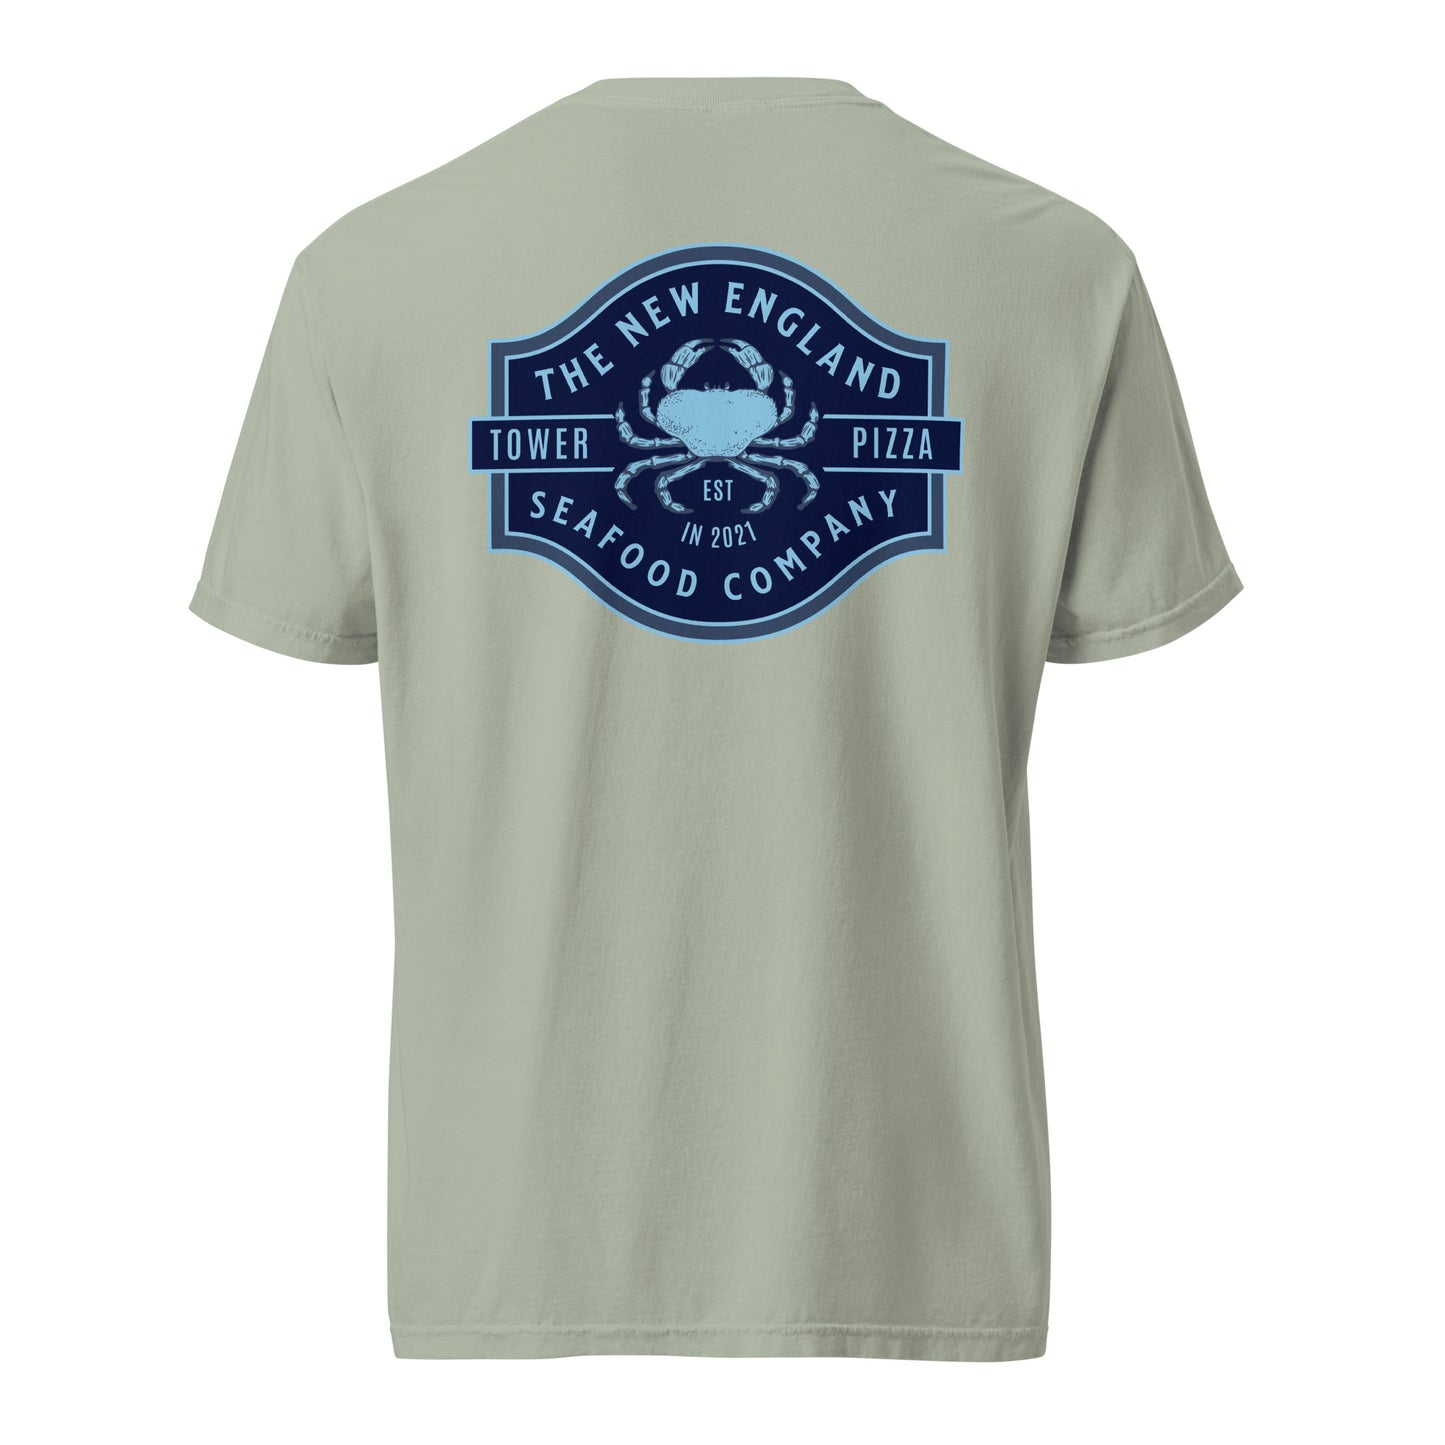 New England Seafood Company Premium Embroidered & Printed Shirt - Tower Pizza Gift Shop